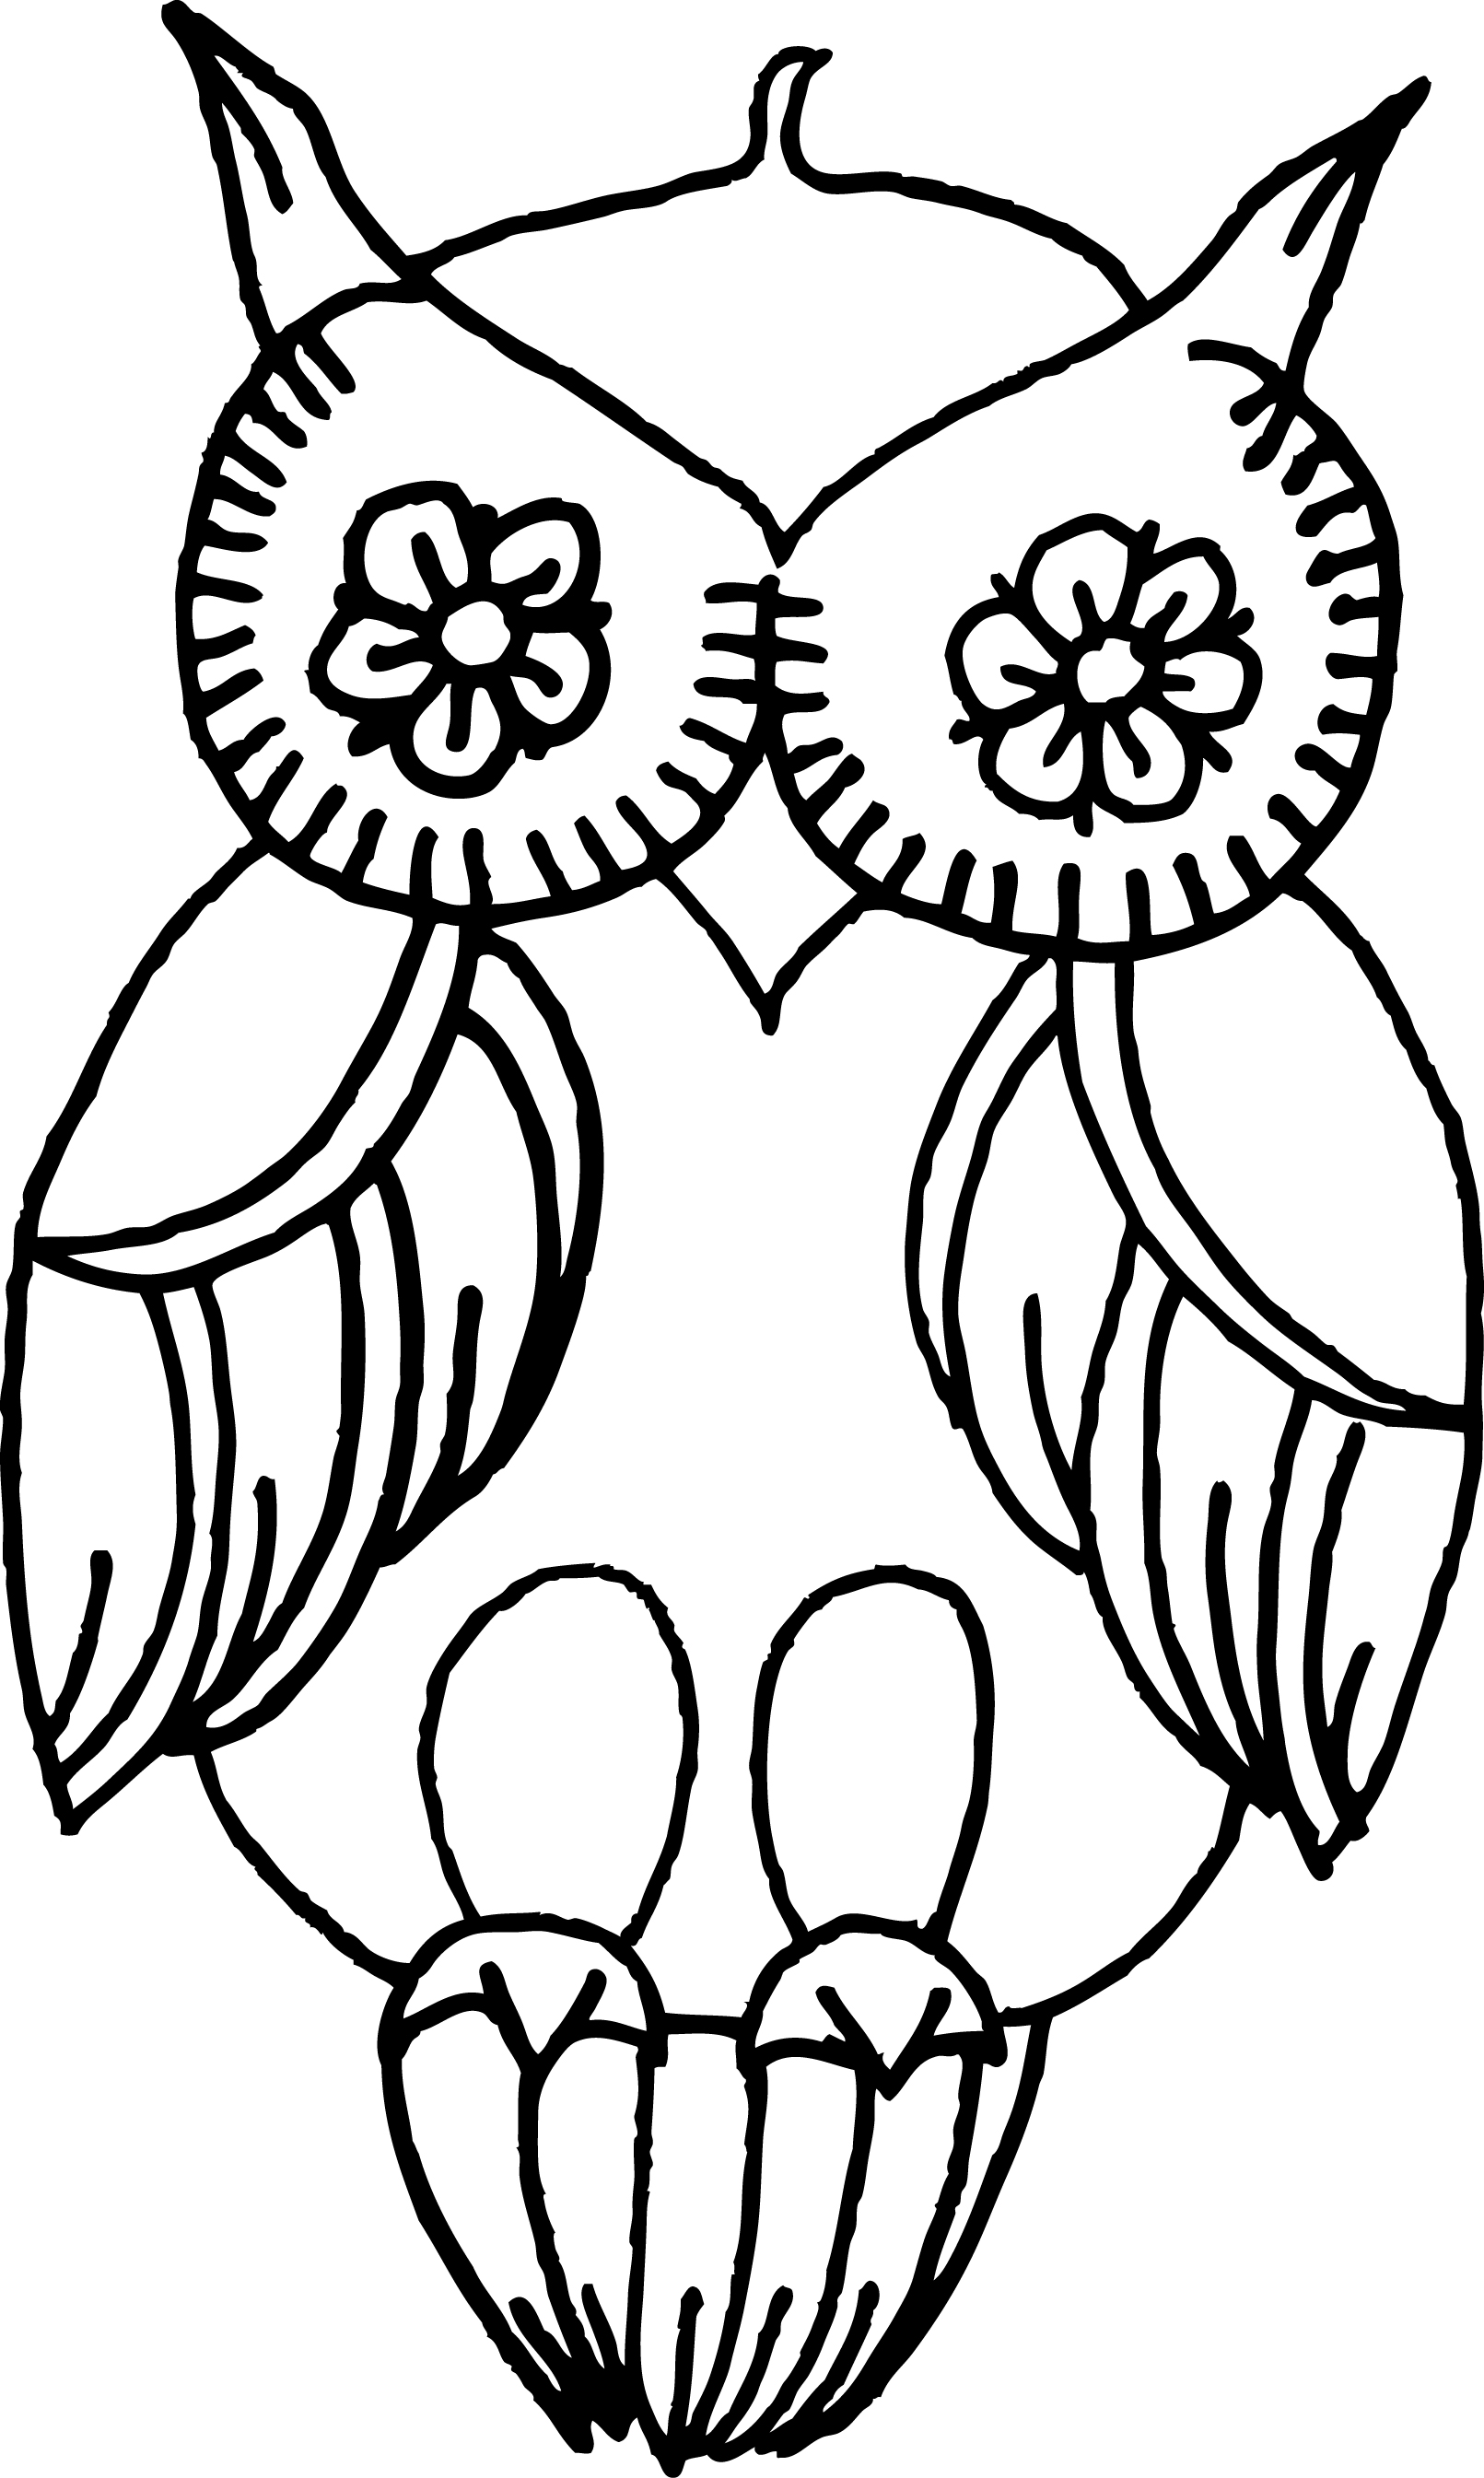 8 Best Images of Printable Pyrography Patterns Owls Owl WoodBurning